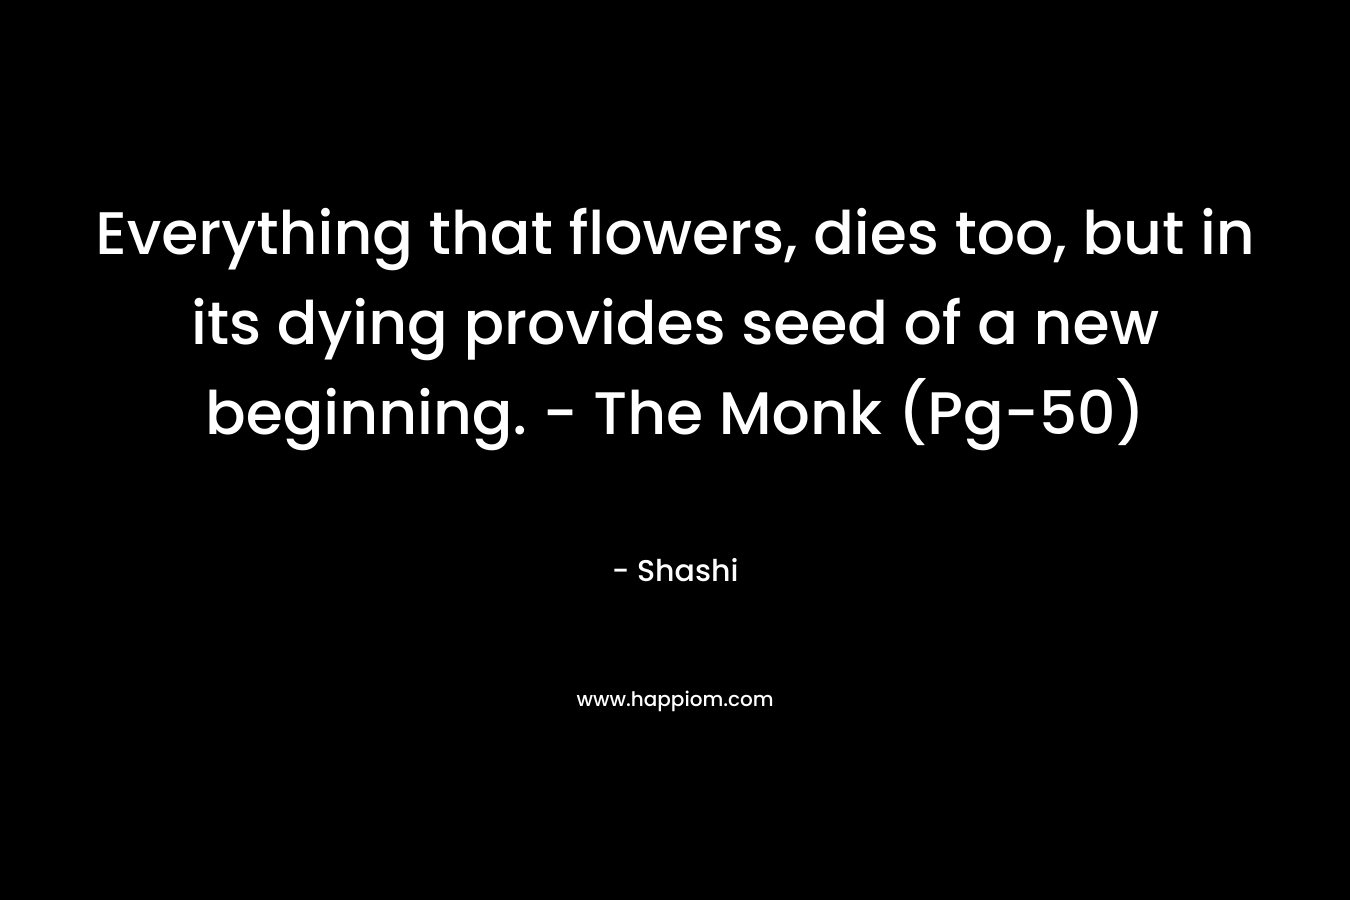 Everything that flowers, dies too, but in its dying provides seed of a new beginning. – The Monk (Pg-50) – Shashi